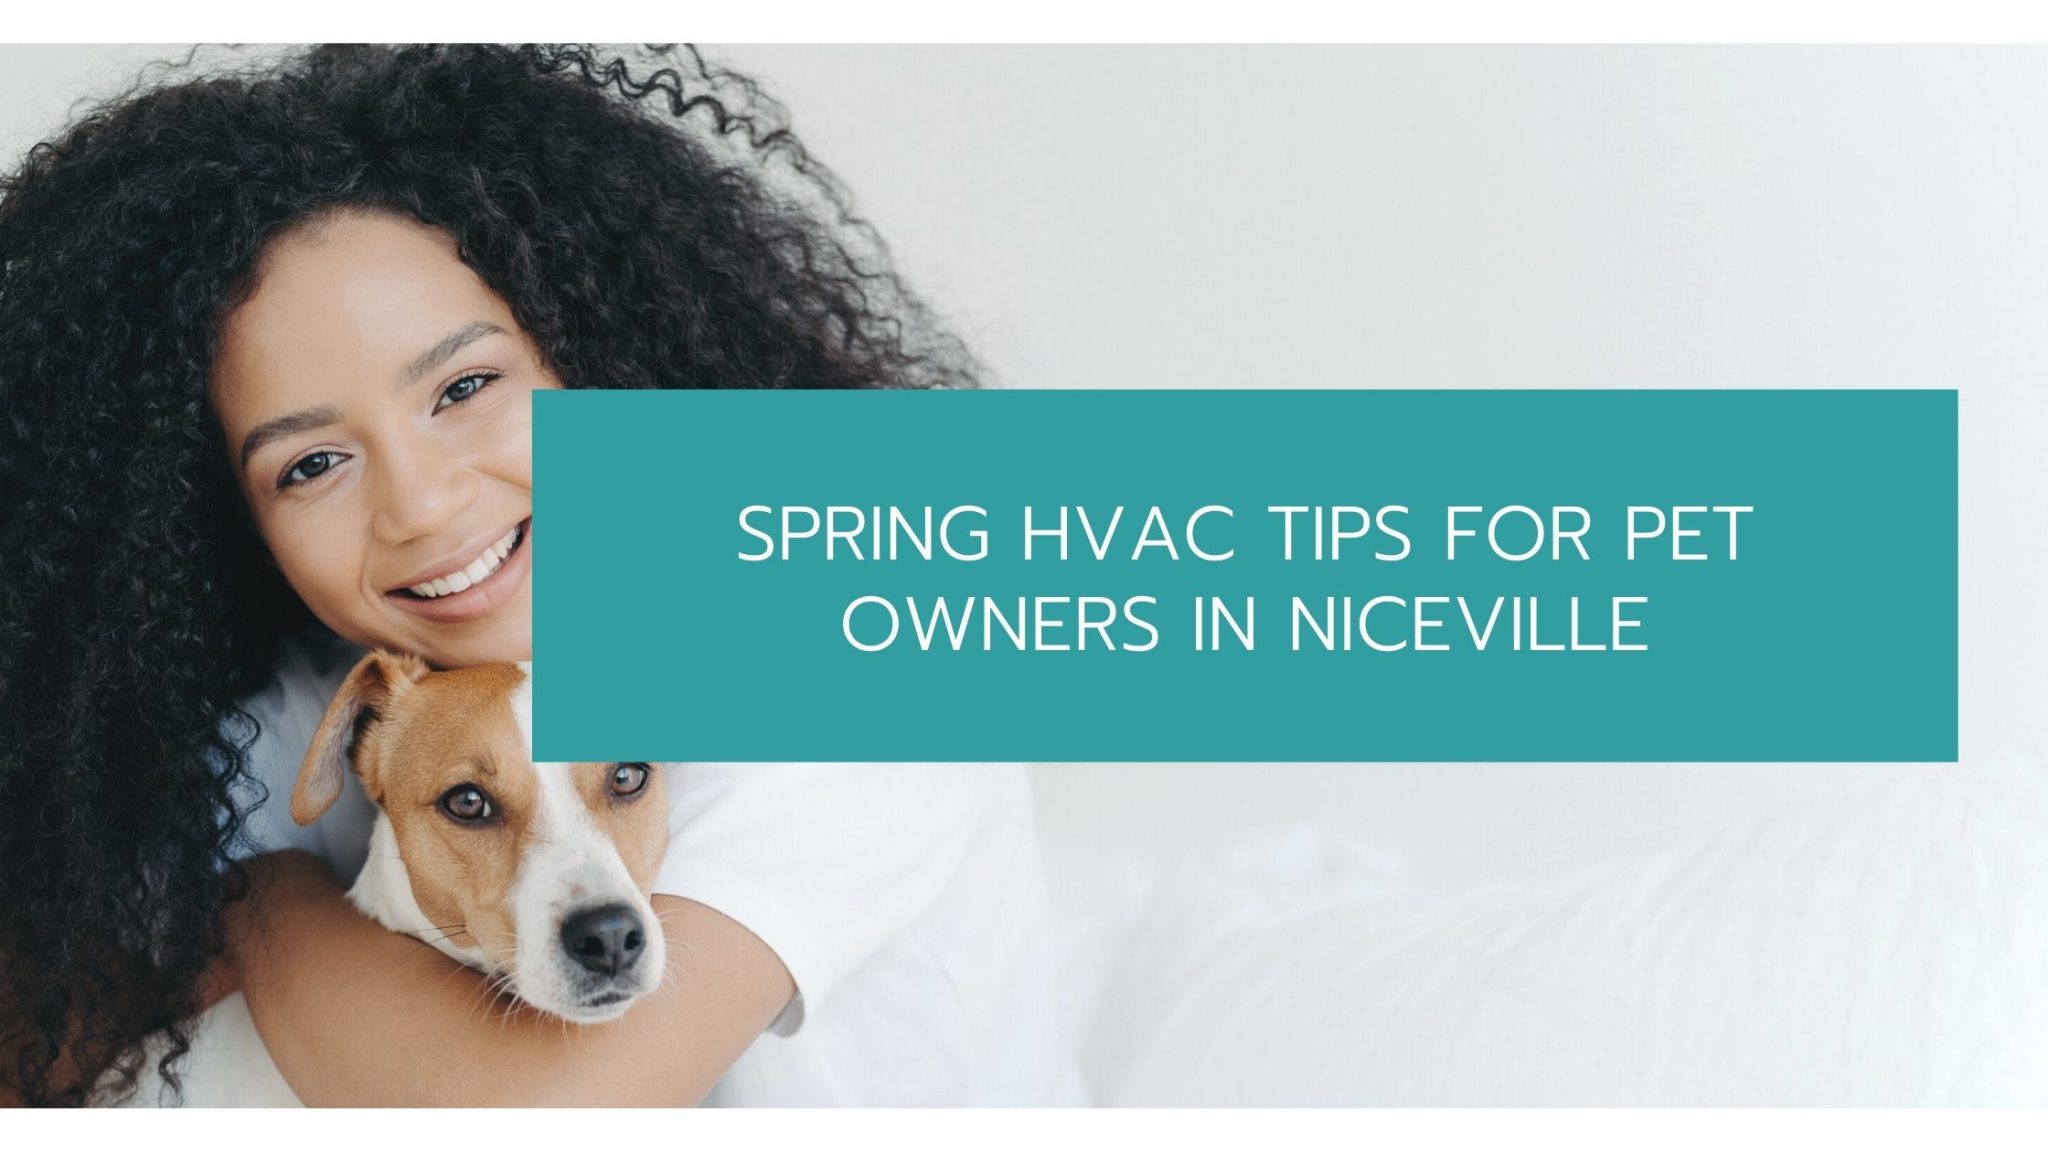 HVAC tips for Pet Owners